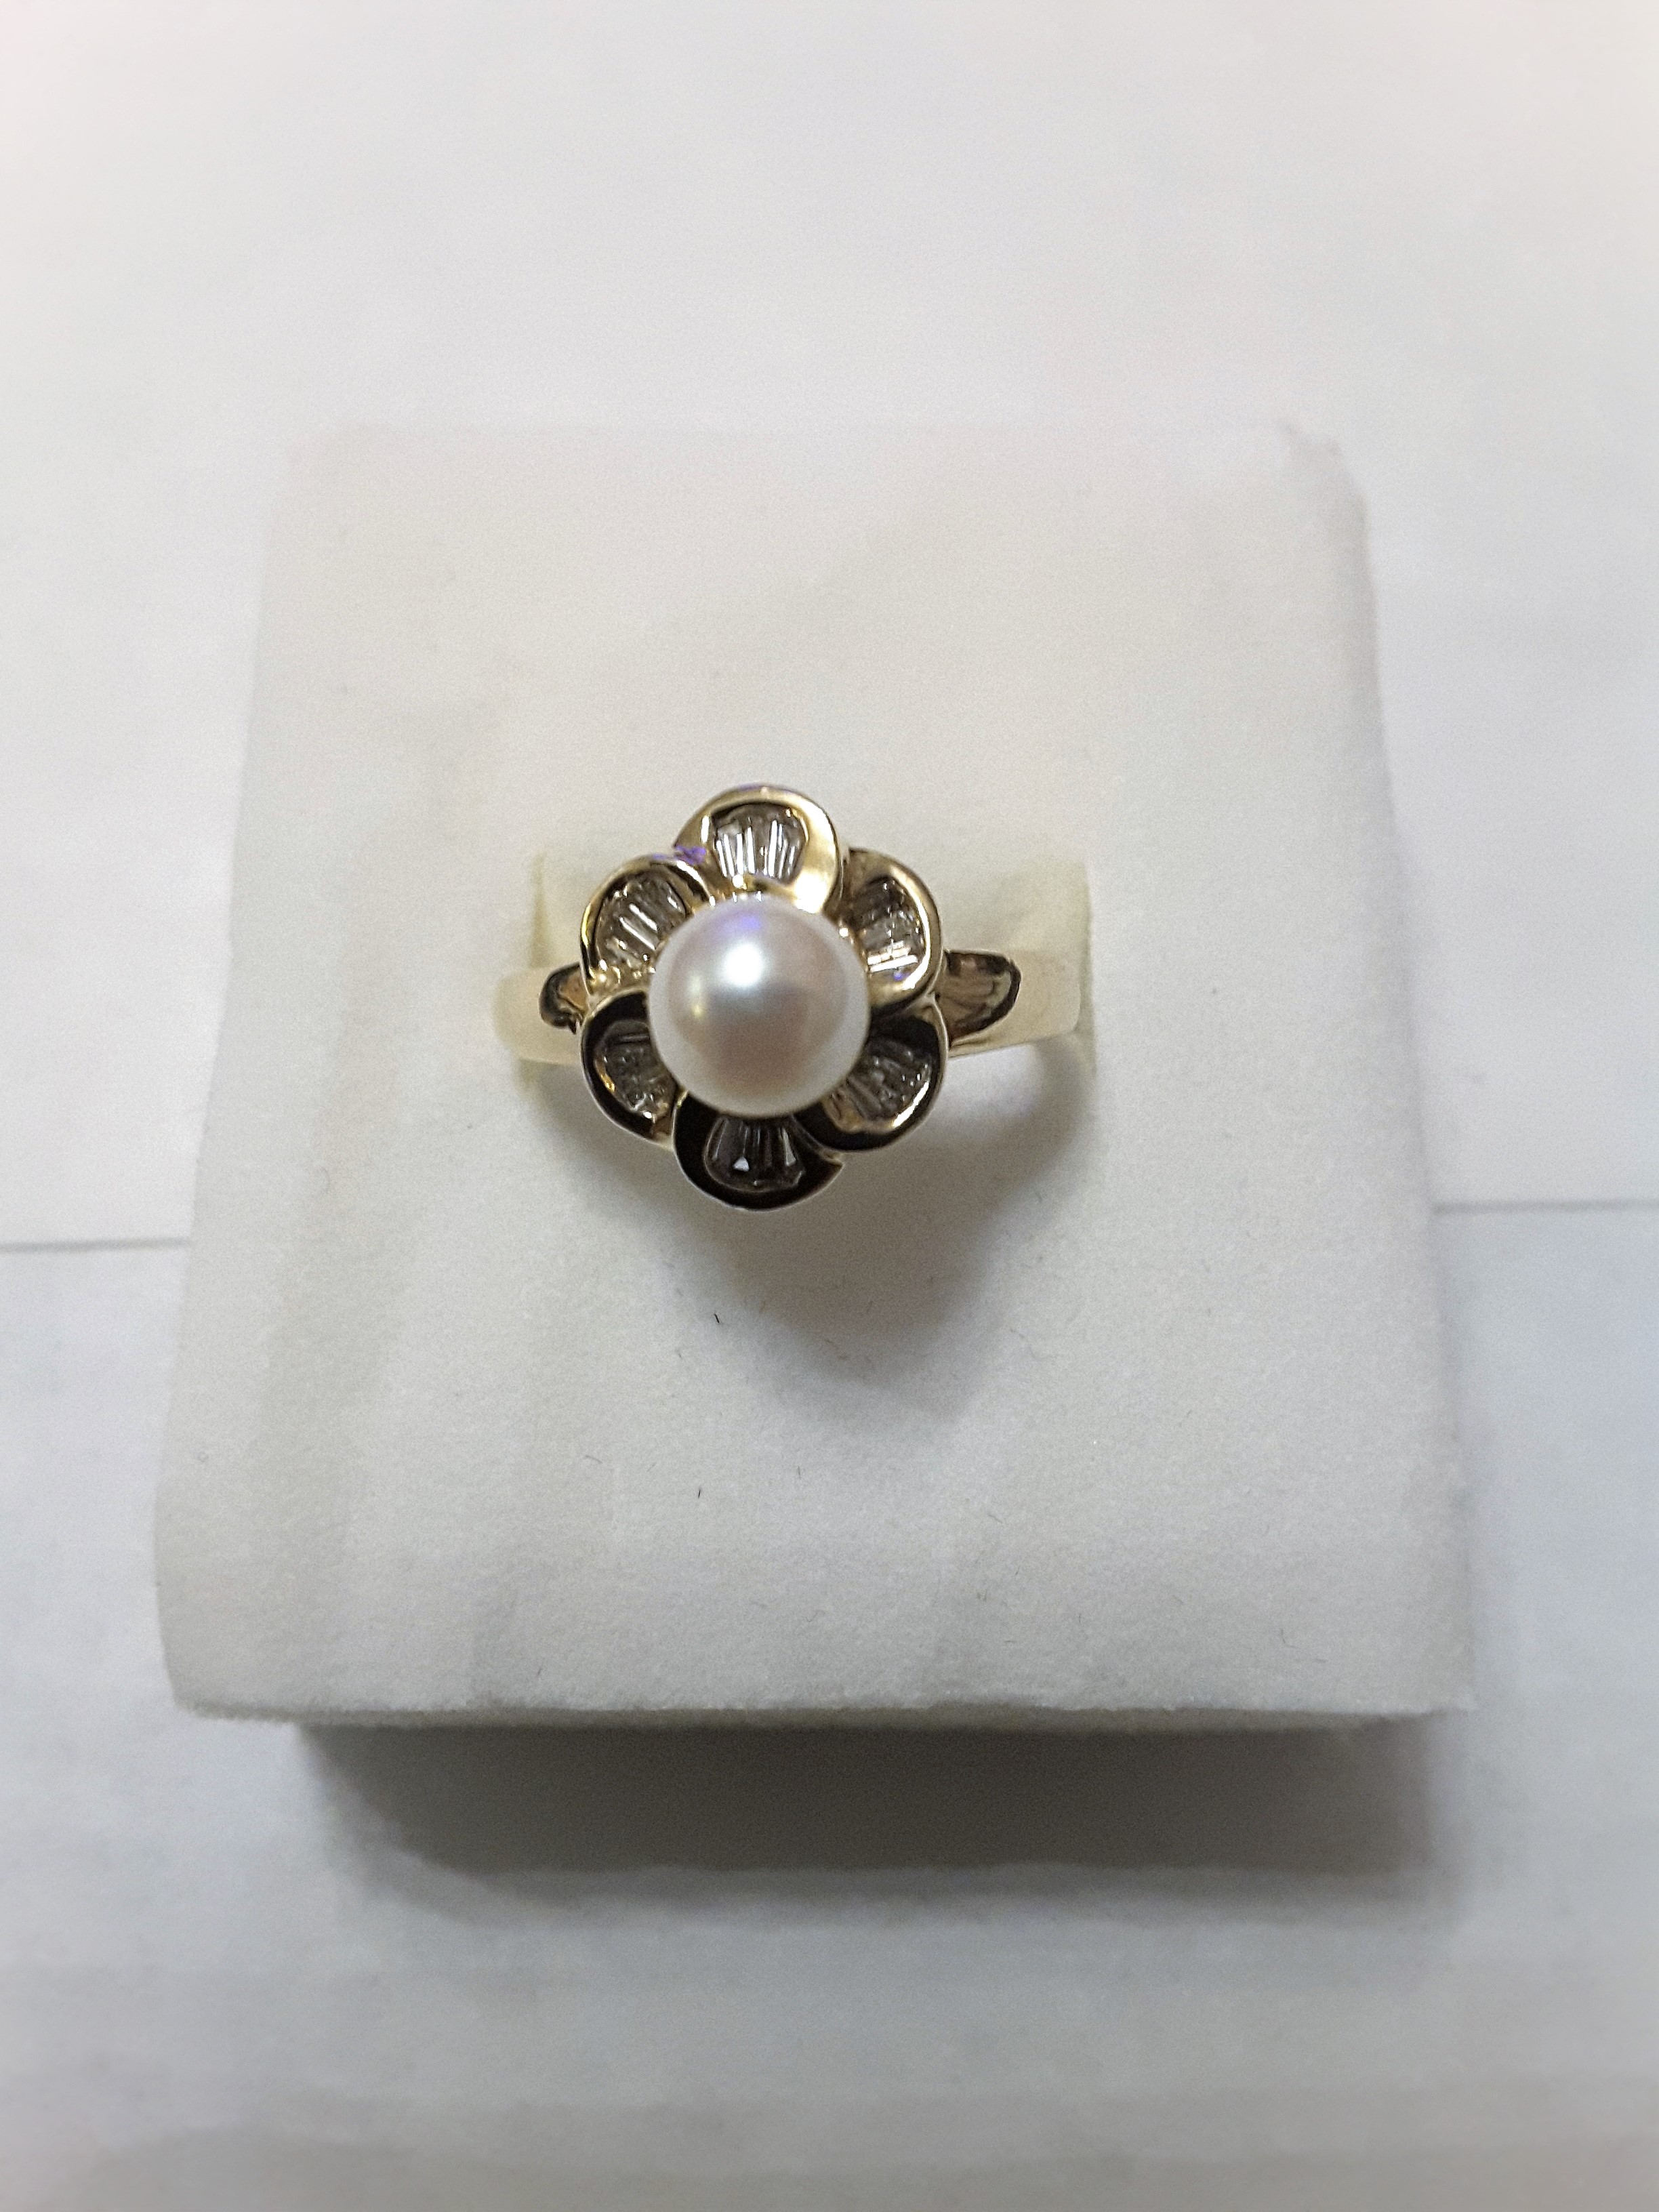 Gold Diamond & Pearl Ring - Image 4 of 8